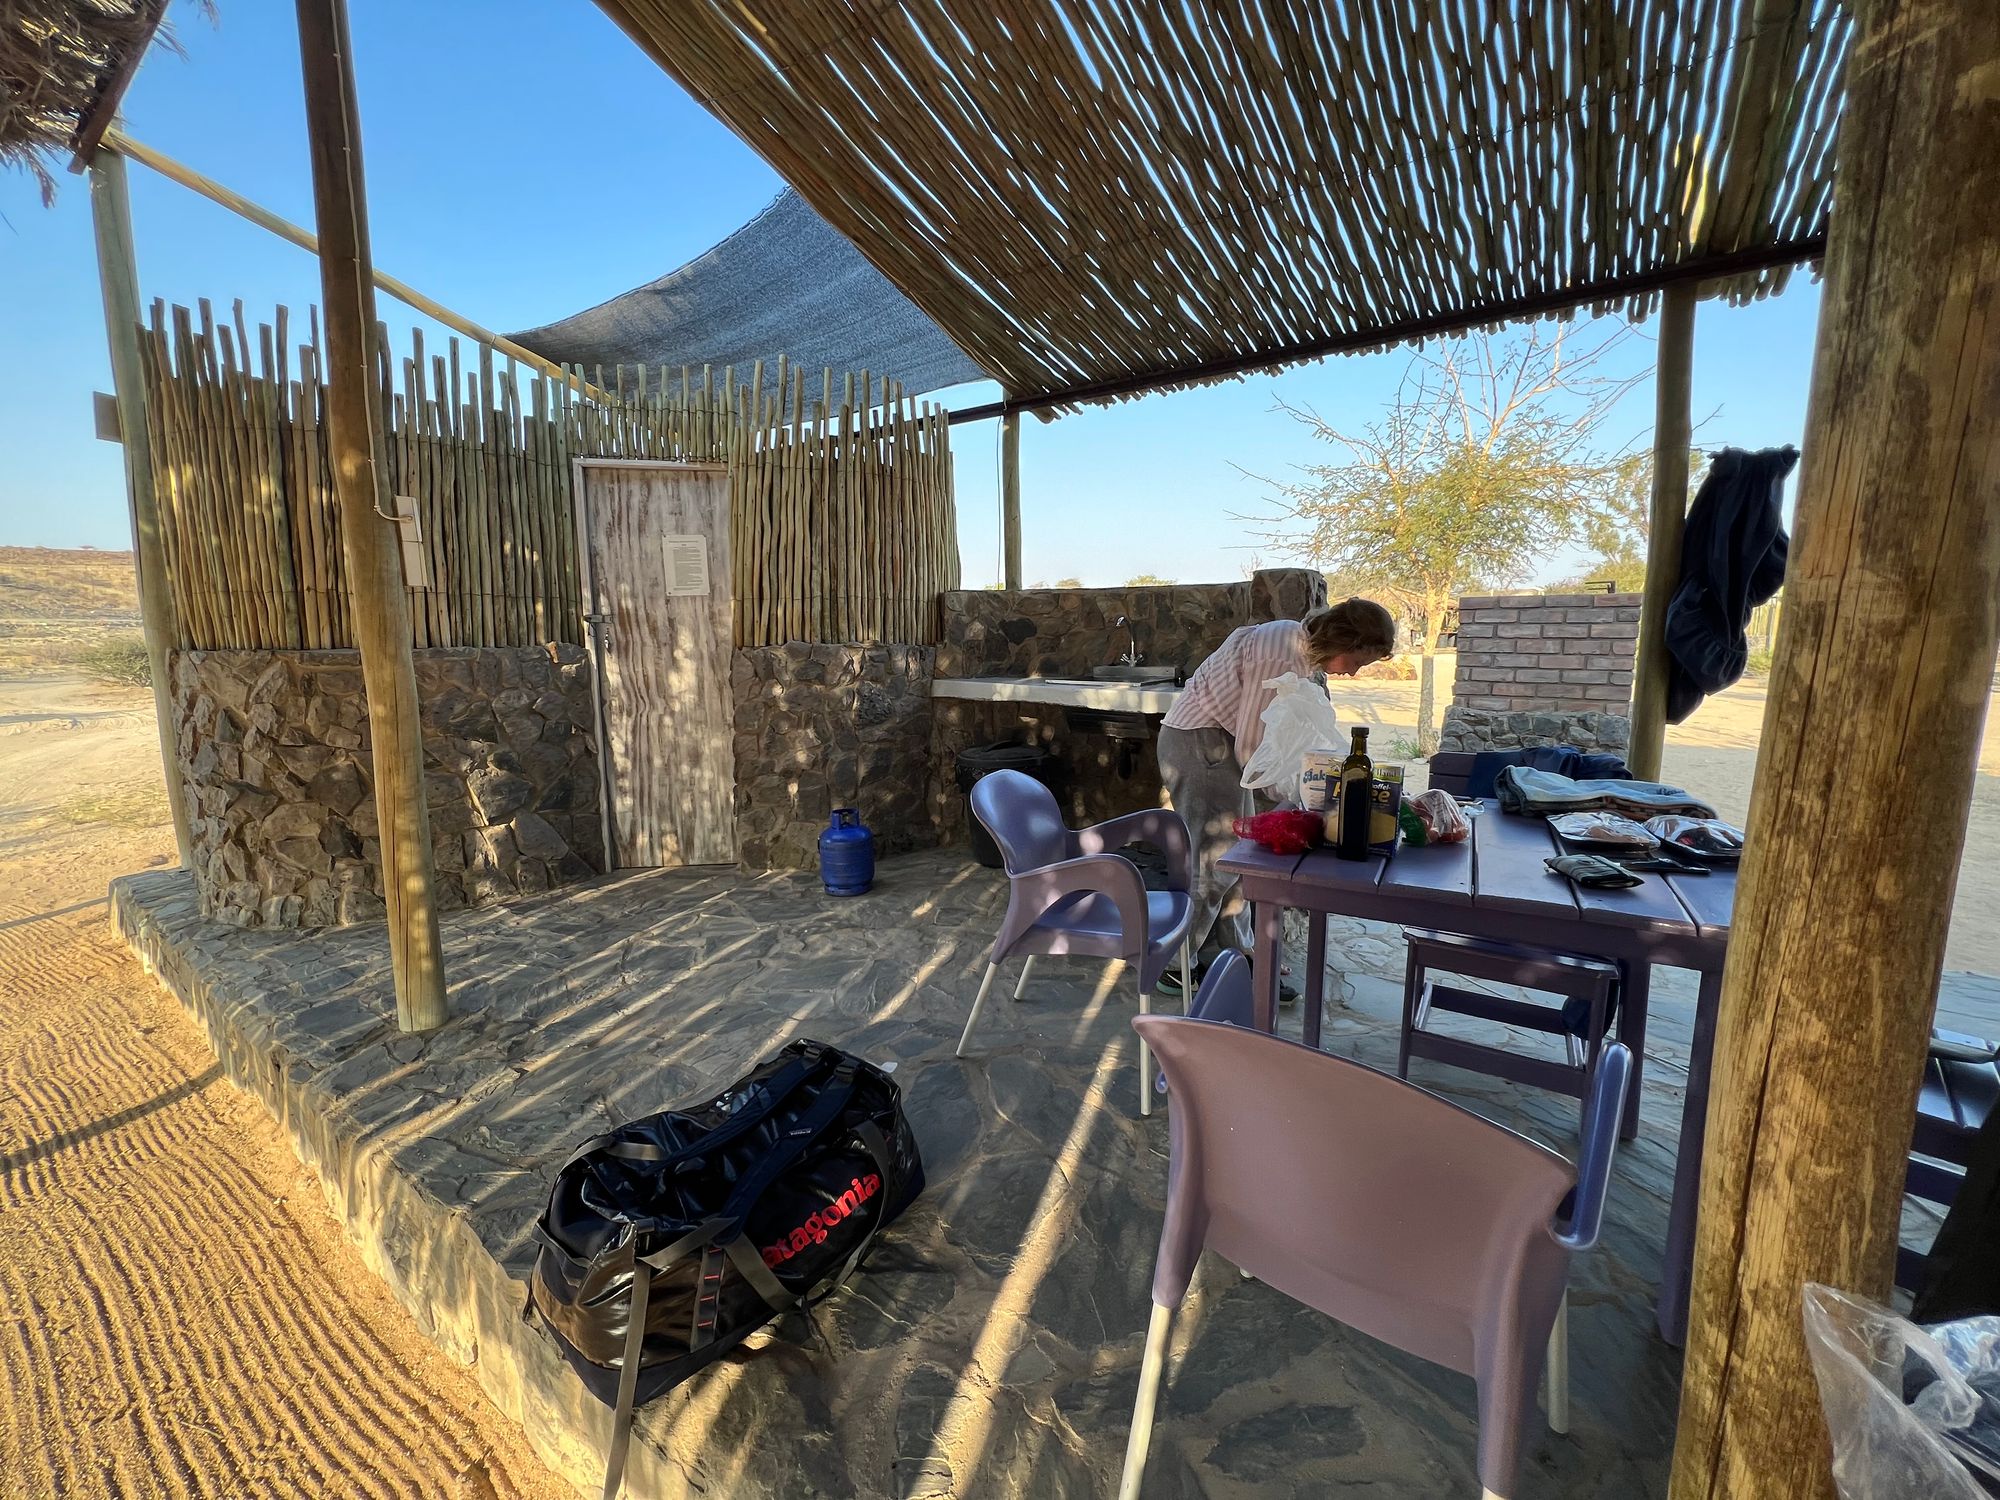 Day 7 and 8: Uis, Damaraland and Twyfel Fountein